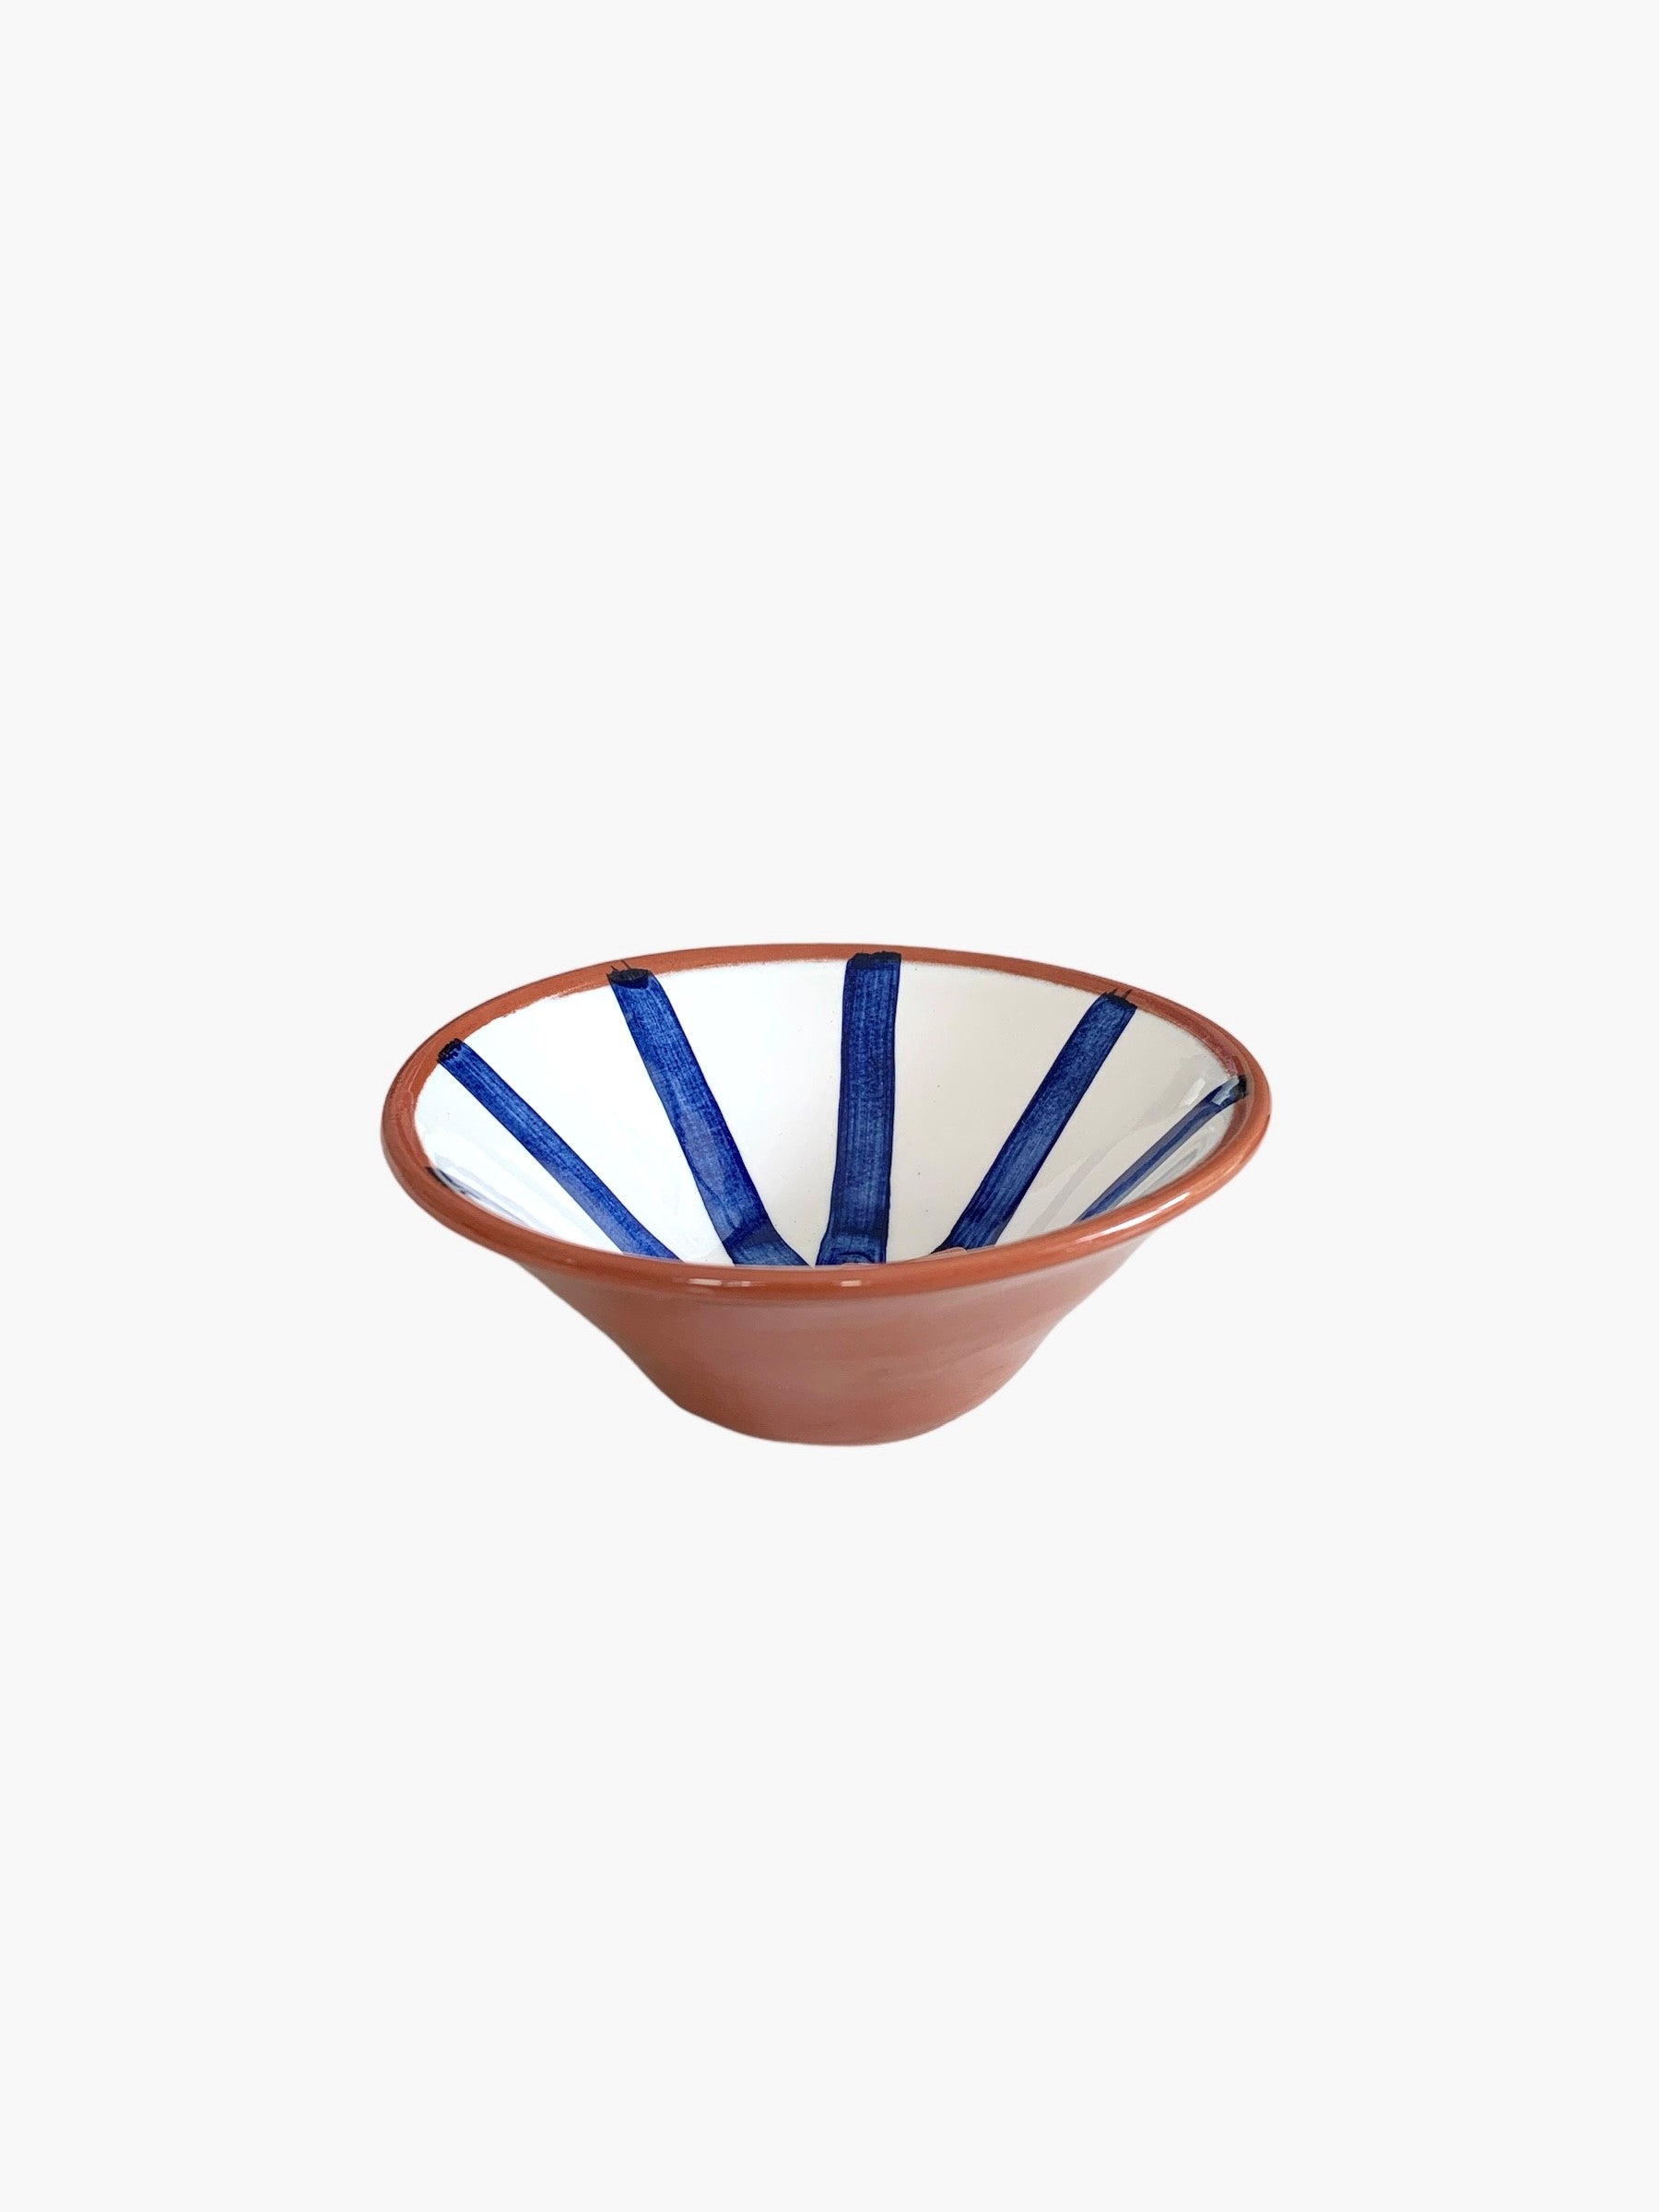 mini ceramic bowl hand-painted with a blue and white segment design.  Made in portugal by casa cubista